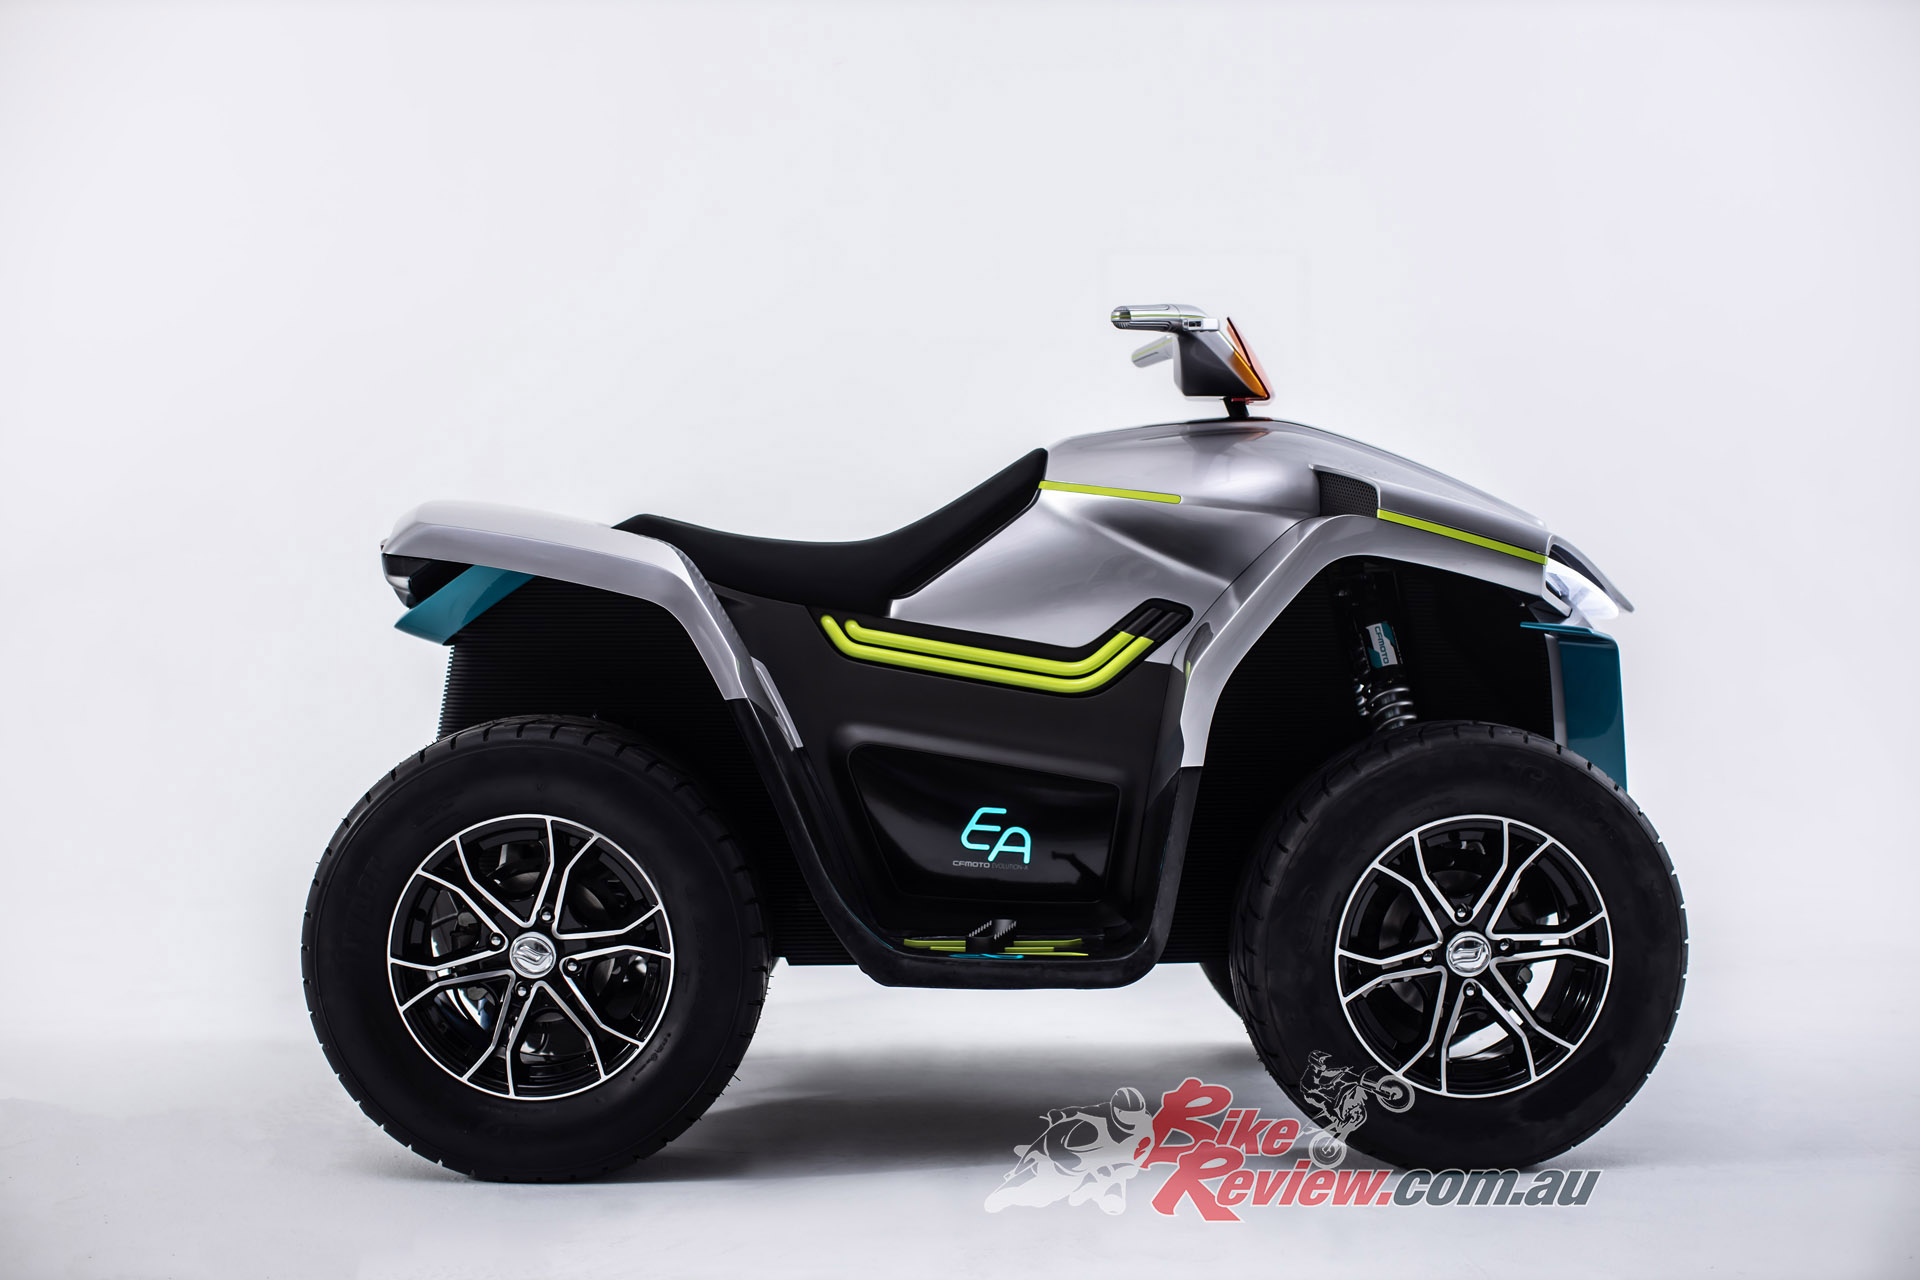 All Electric ATV concept from CFMoto called Evolution A - Bike Review